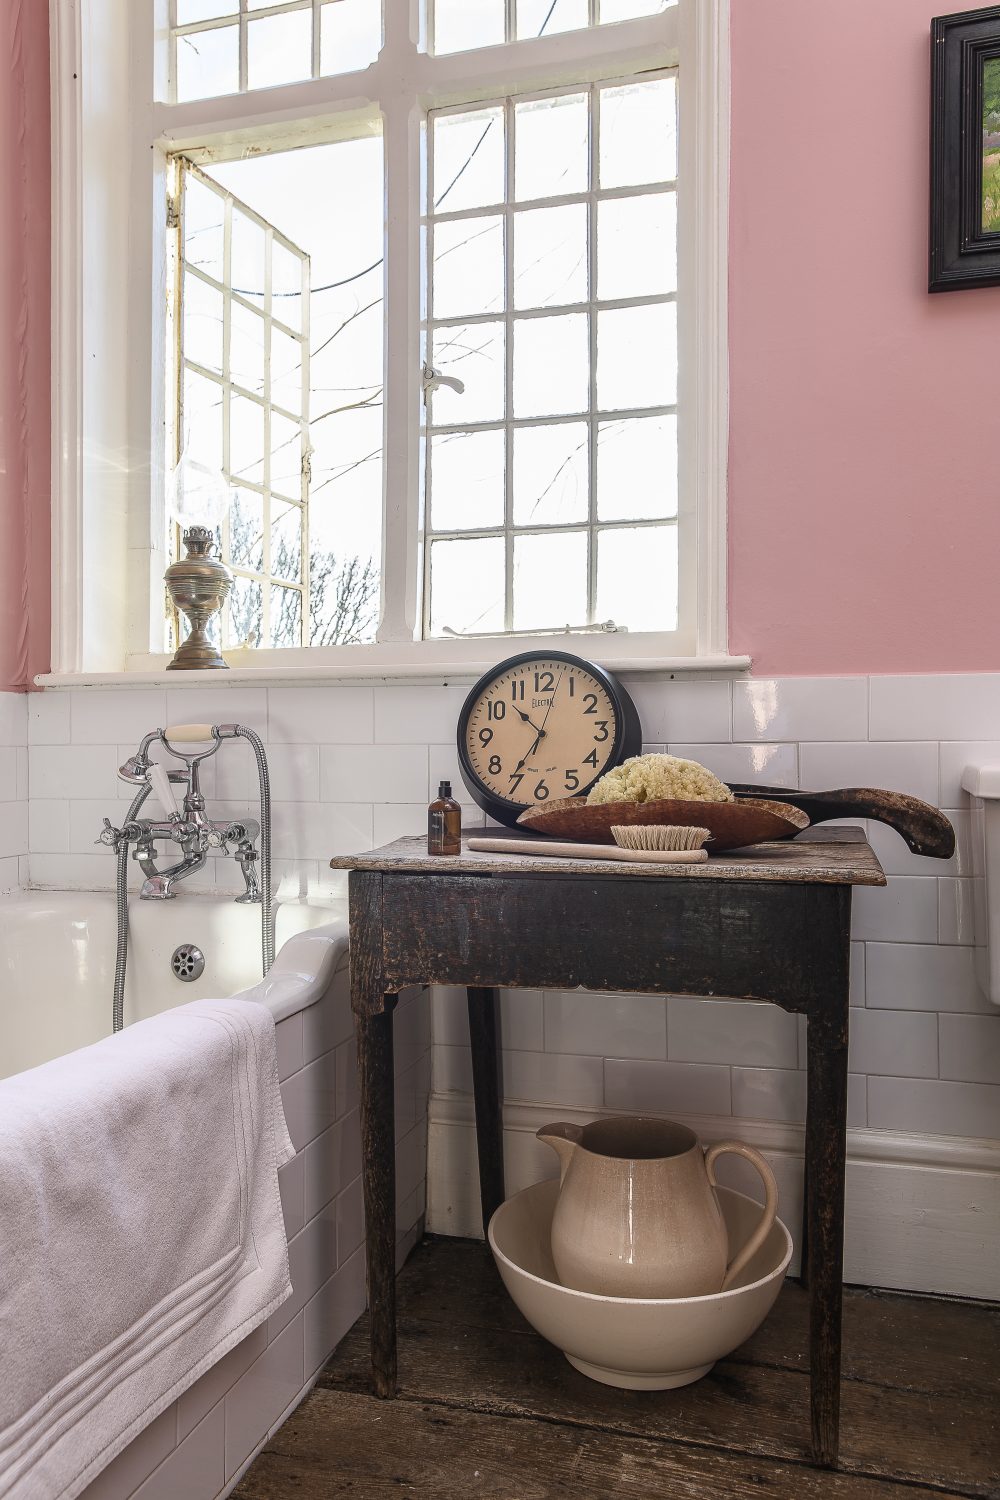 The pink family bathroom has the original wide floorboards. “I love the way that you can see how they were sawn by hand – made in a saw pit,” Alex explains